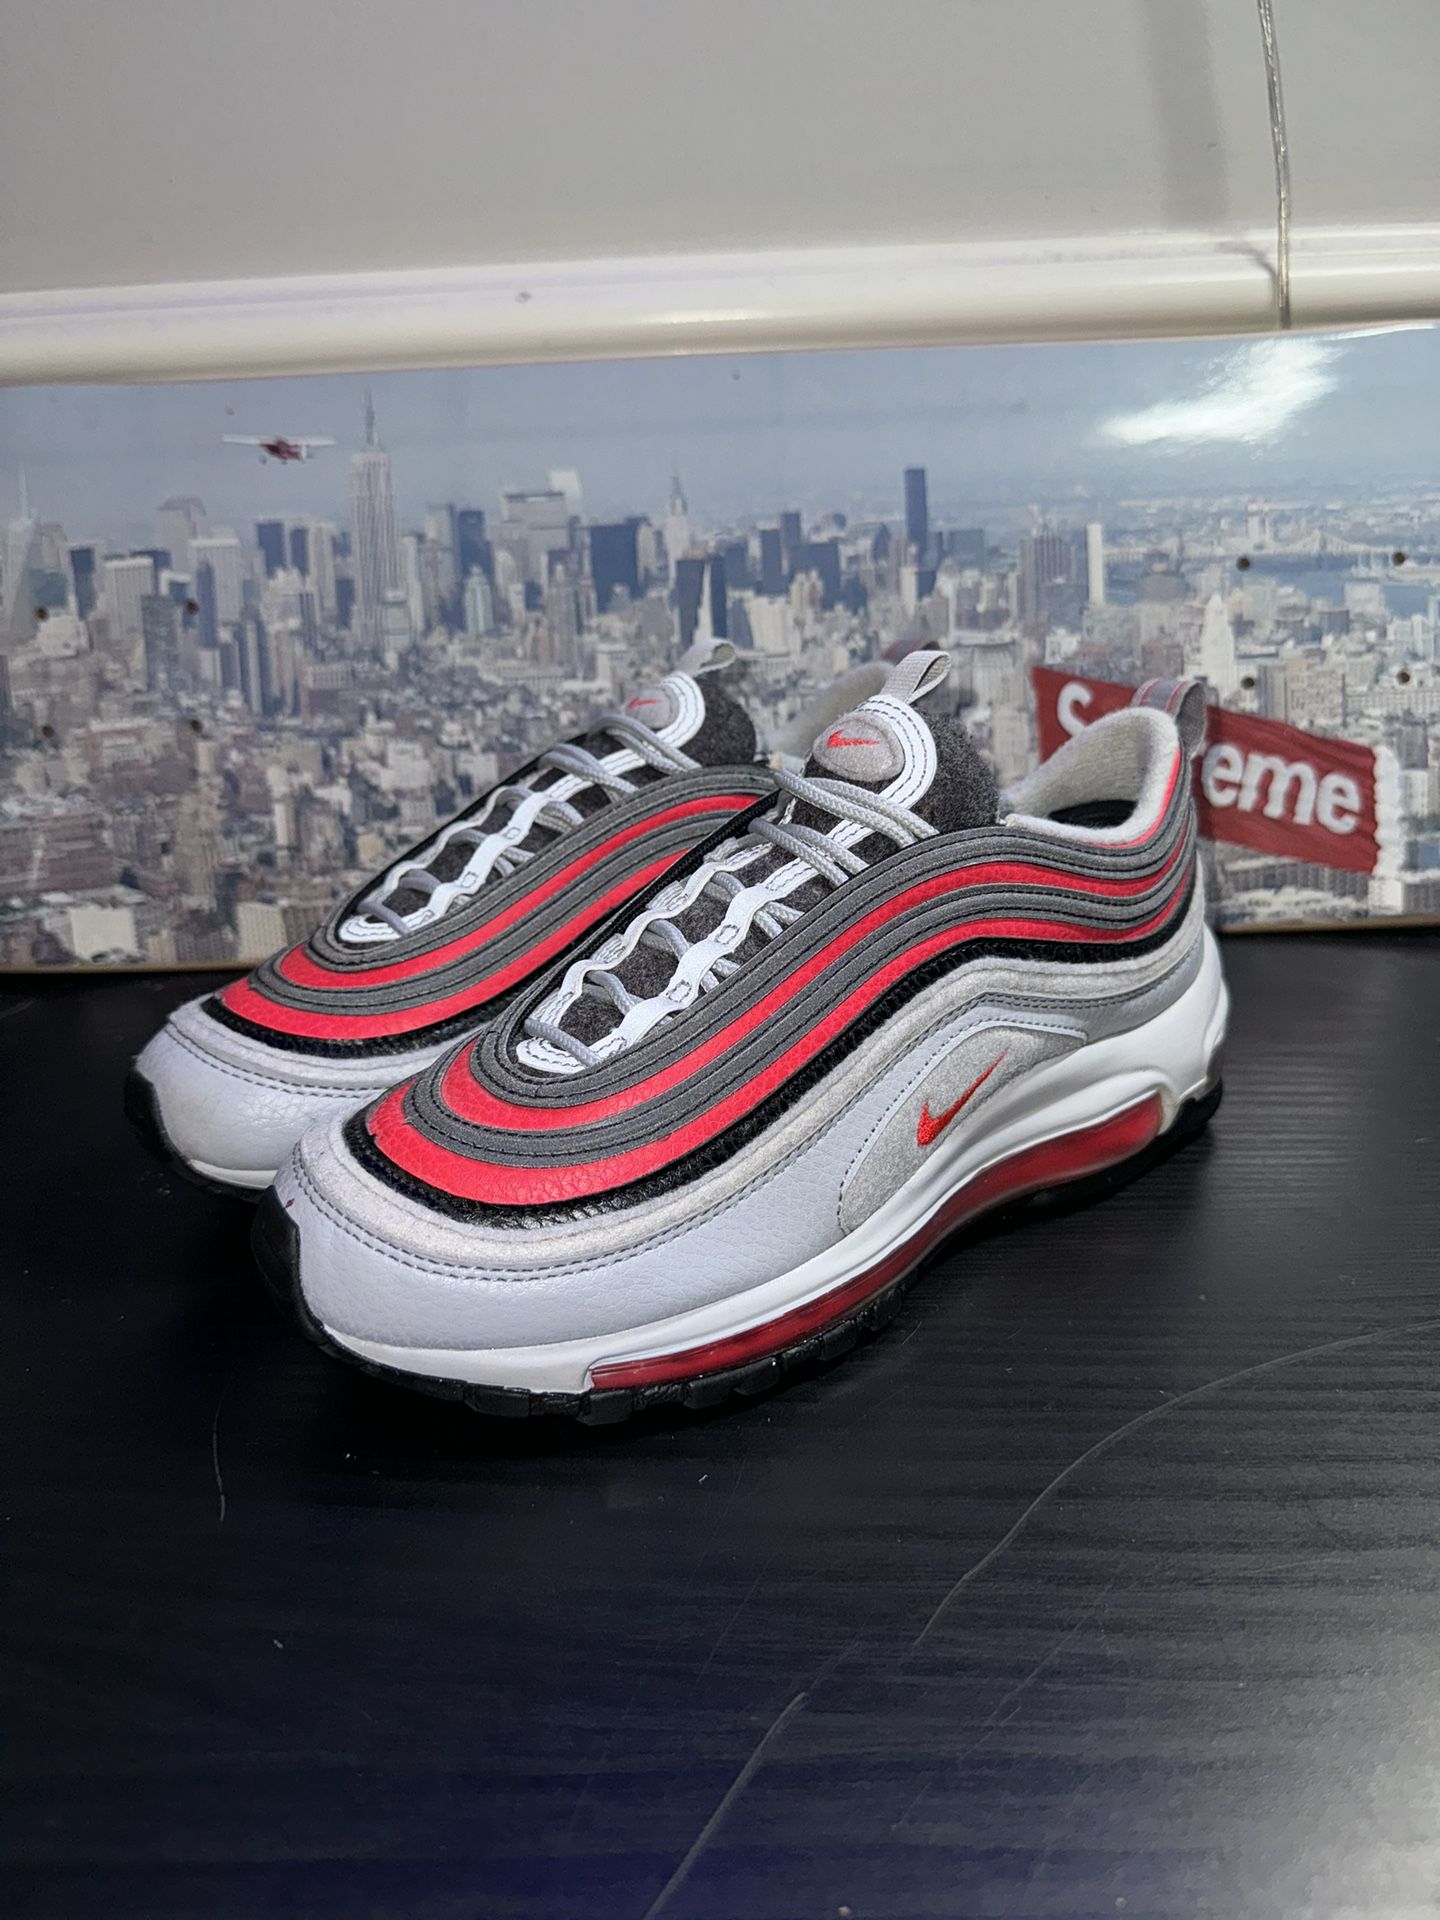 Nike Air Max 97 Felt GS Casual Shoes Wolf Grey/Red Orbit CD4831-002 Kids Size 5Y